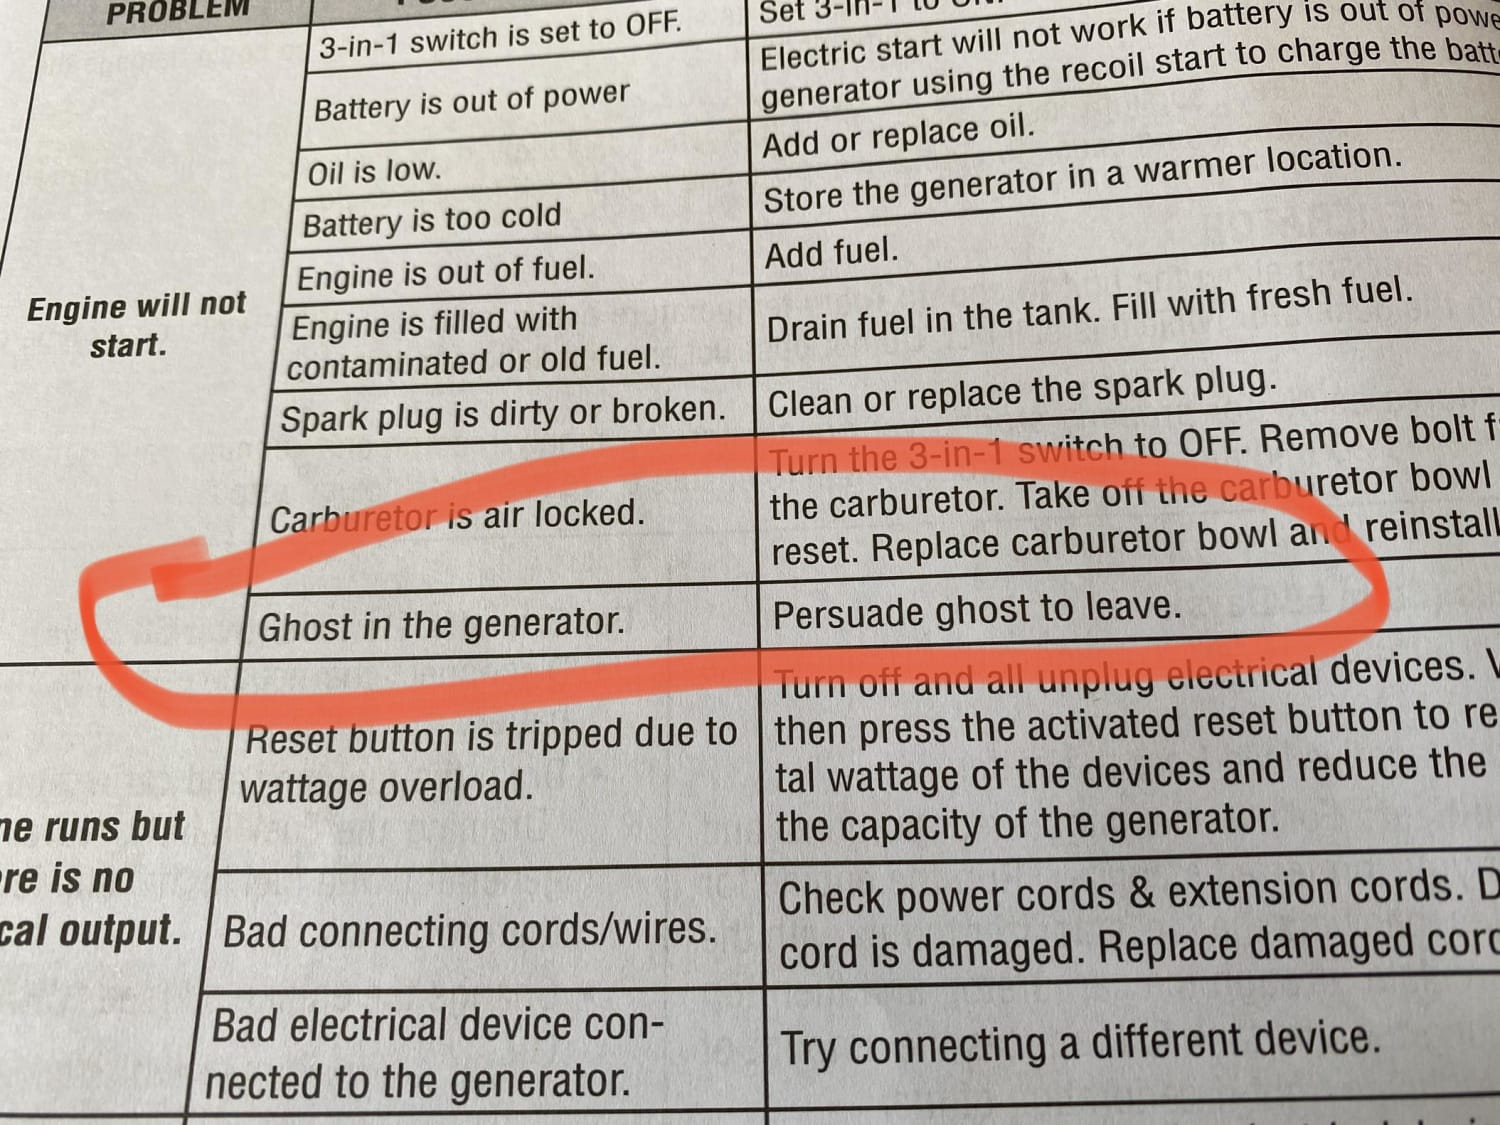 Bought a new generator and thoroughly reading the instructions. Ghost in the generator.